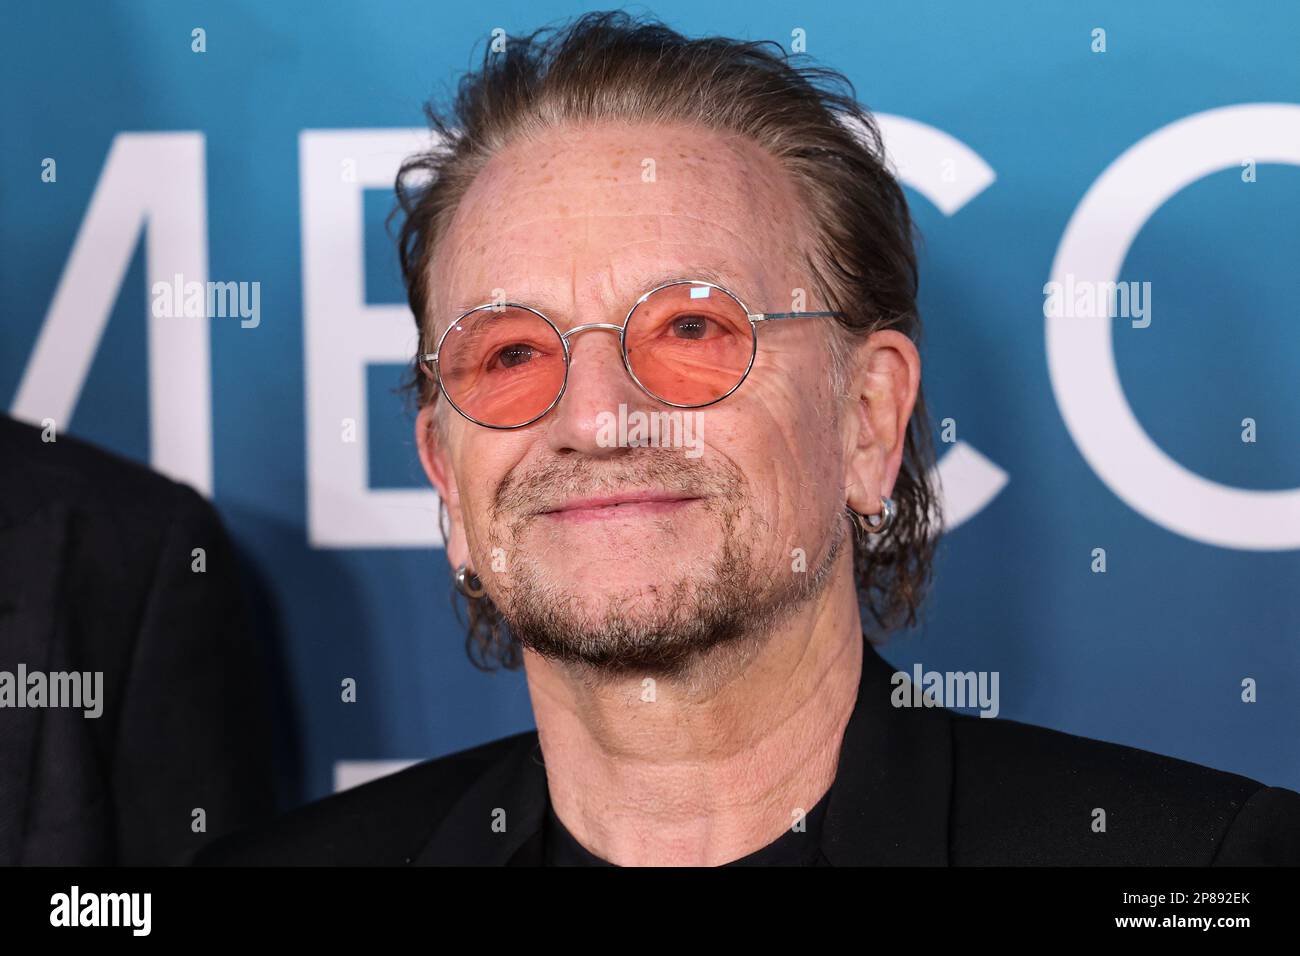 Los Angeles, United States. 08th Mar, 2023. LOS ANGELES, CALIFORNIA, USA - MARCH 08: Irish singer-songwriter, activist, and philanthropist Bono (Paul David Hewson) arrives at the Los Angeles Premiere Of Disney 's Music Docu-Special 'Bono & The Edge: A Sort of Homecoming, With Dave Letterman' held at The Orpheum Theatre on March 8, 2023 in Los Angeles, California, United States. (Photo by Xavier Collin/Image Press Agency) Credit: Image Press Agency/Alamy Live News Stock Photo